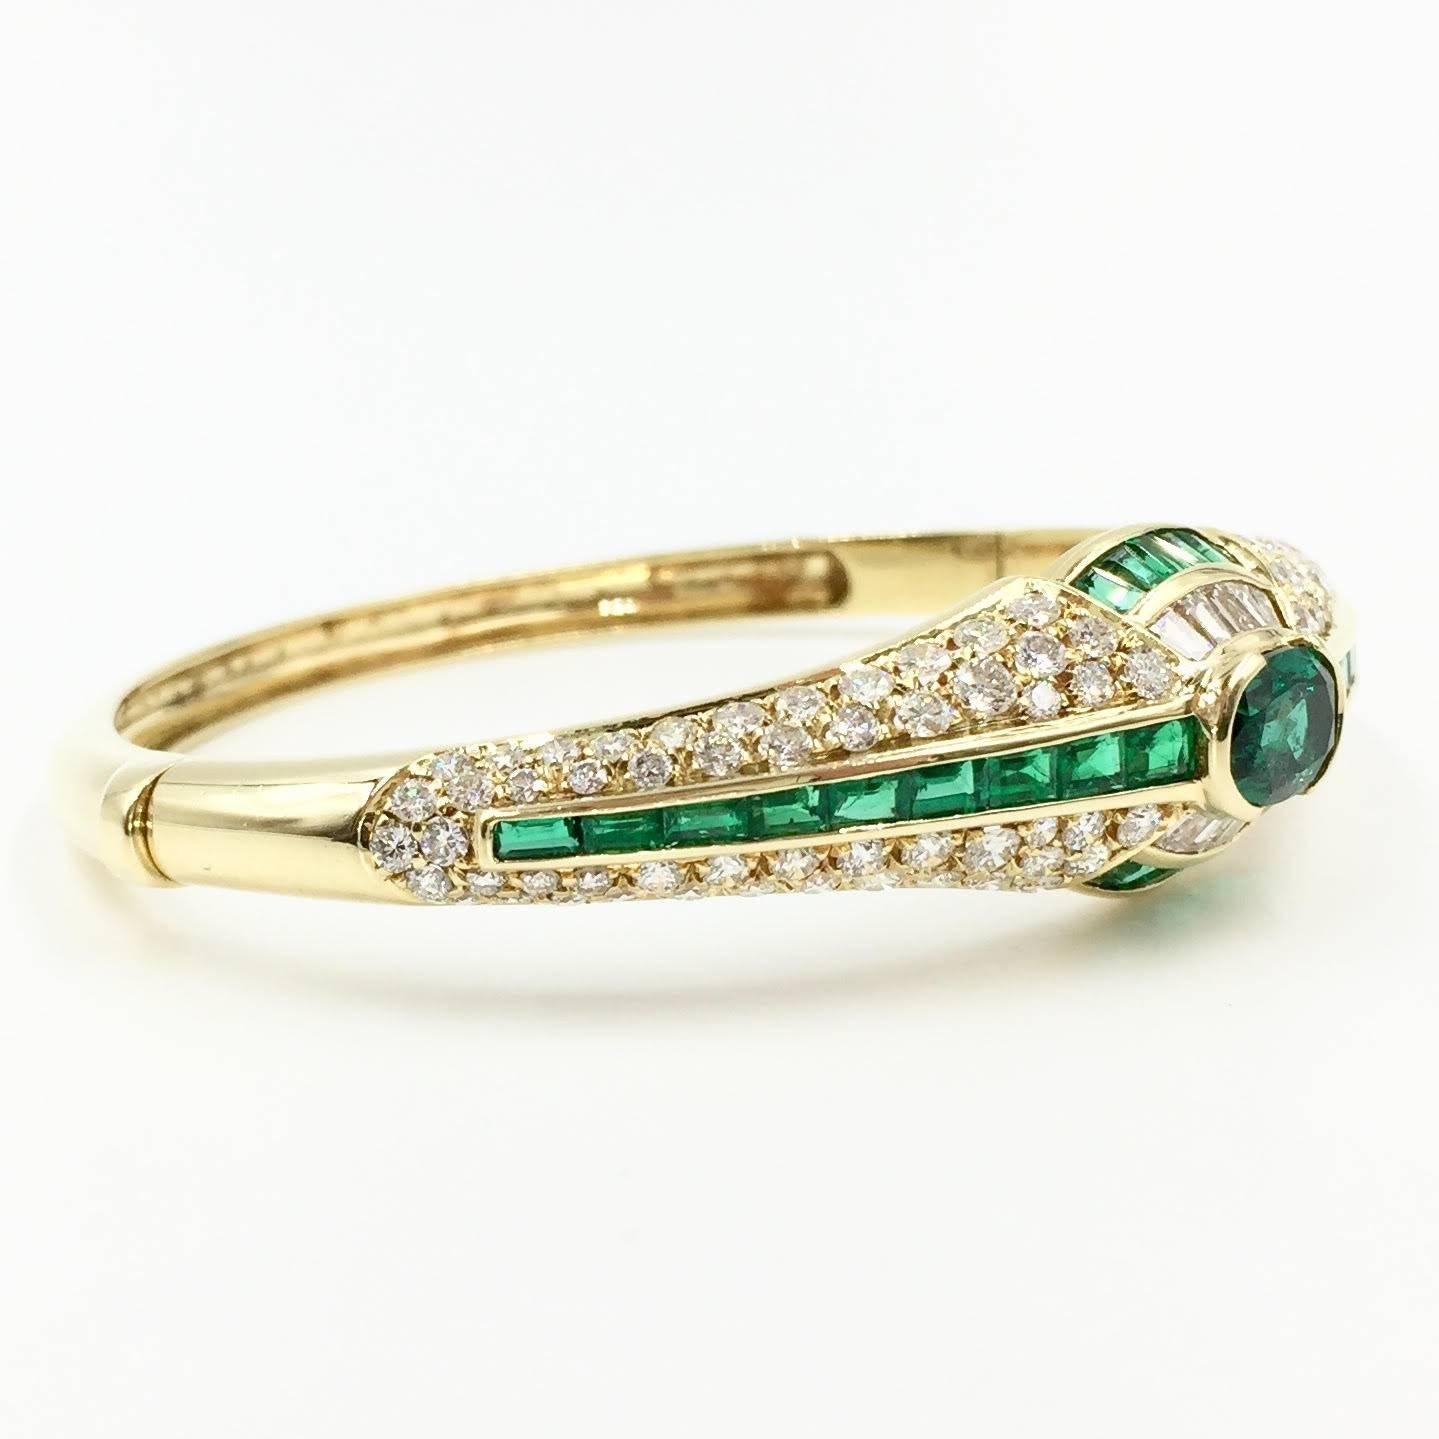 A beautiful emerald and diamond Art Deco inspired bangle bracelet made with exceptional quality stones. Made in 18K yellow gold with incredible craftsmanship. The emerald color is a very rich and lively green. Diamonds are of high quality,